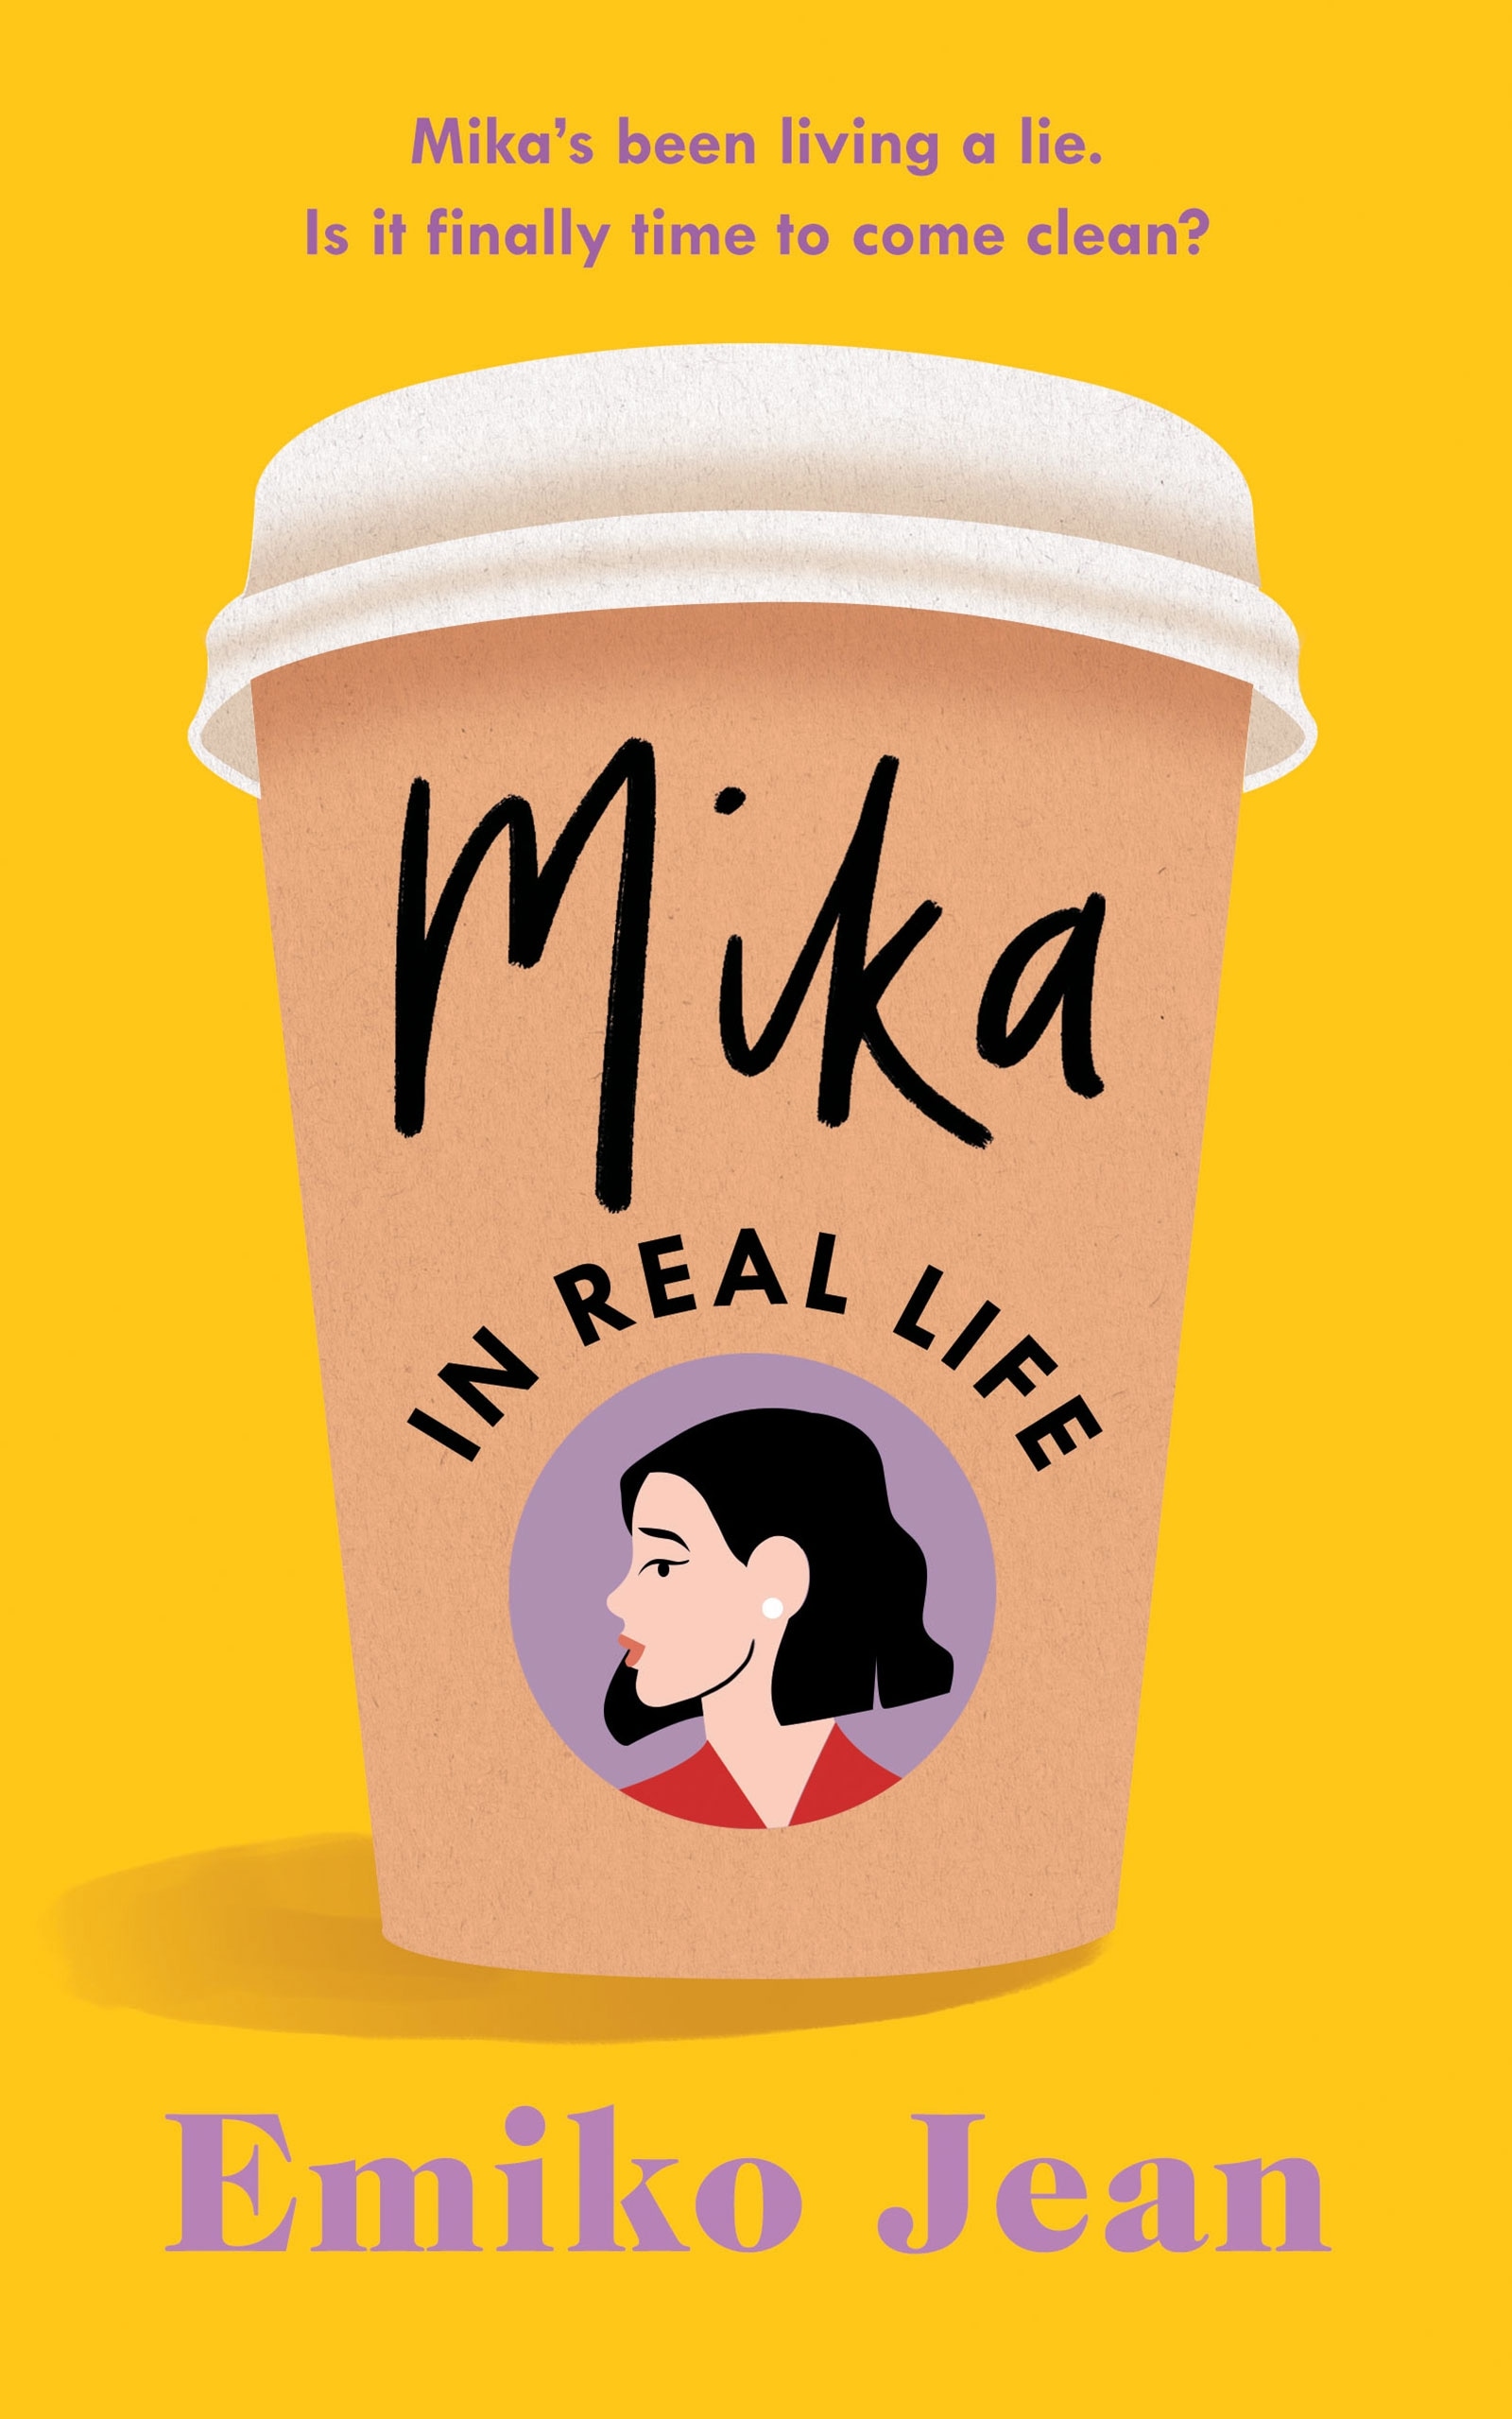 Book “Mika In Real Life” by Emiko Jean — September 1, 2022